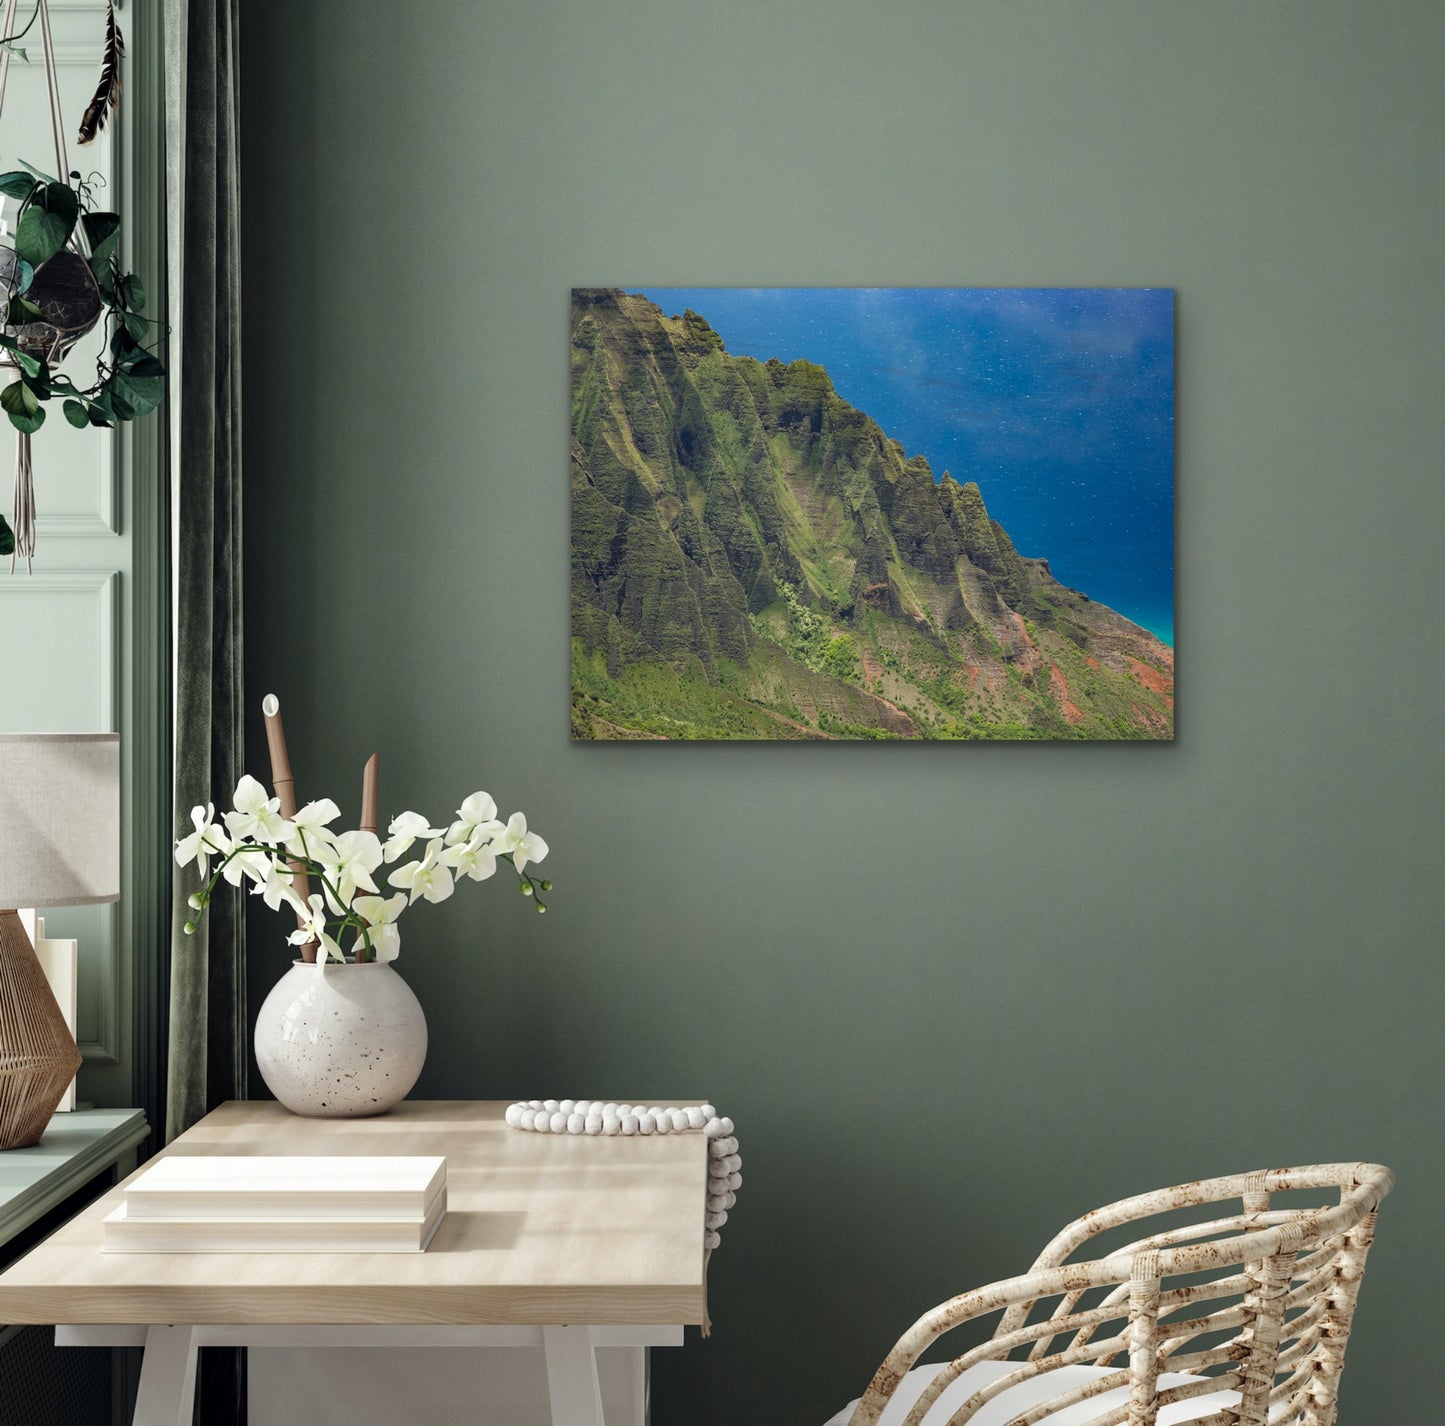 Wall demo of Cathedral Profile, a close up fine art photograph of the cliffs that frame Kauai’s Kalalau Valley. Landscape photograph by Inspiring Images Hawaii.